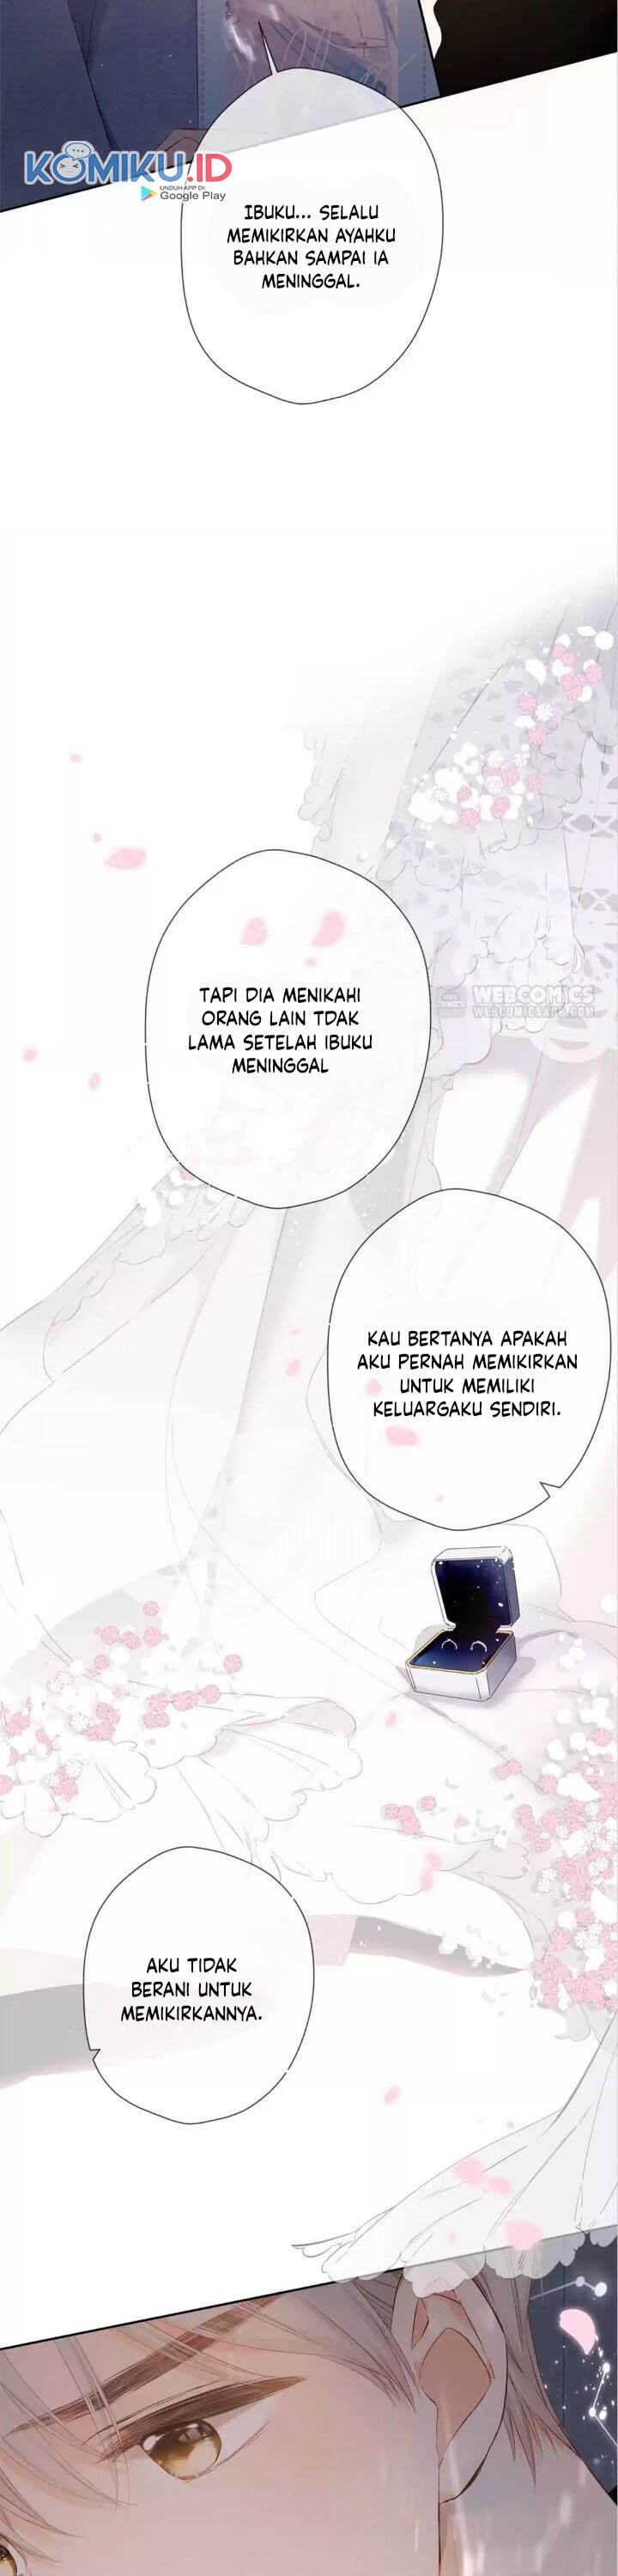 Once More Chapter 47